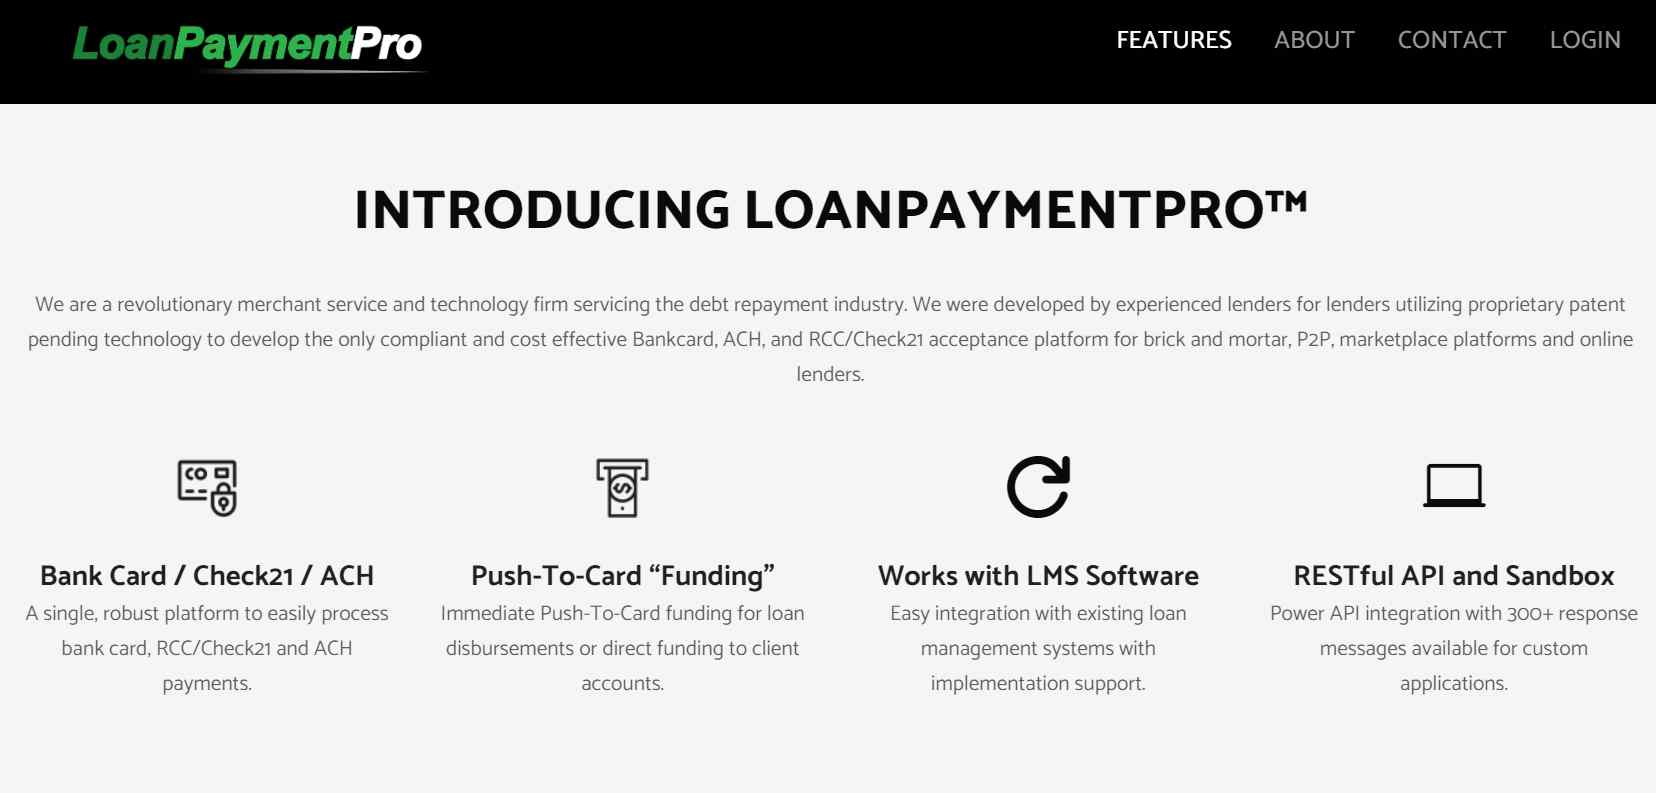 LoanPay Pro is loan amortization software that makes it easy to set up and manage your loan payments online.